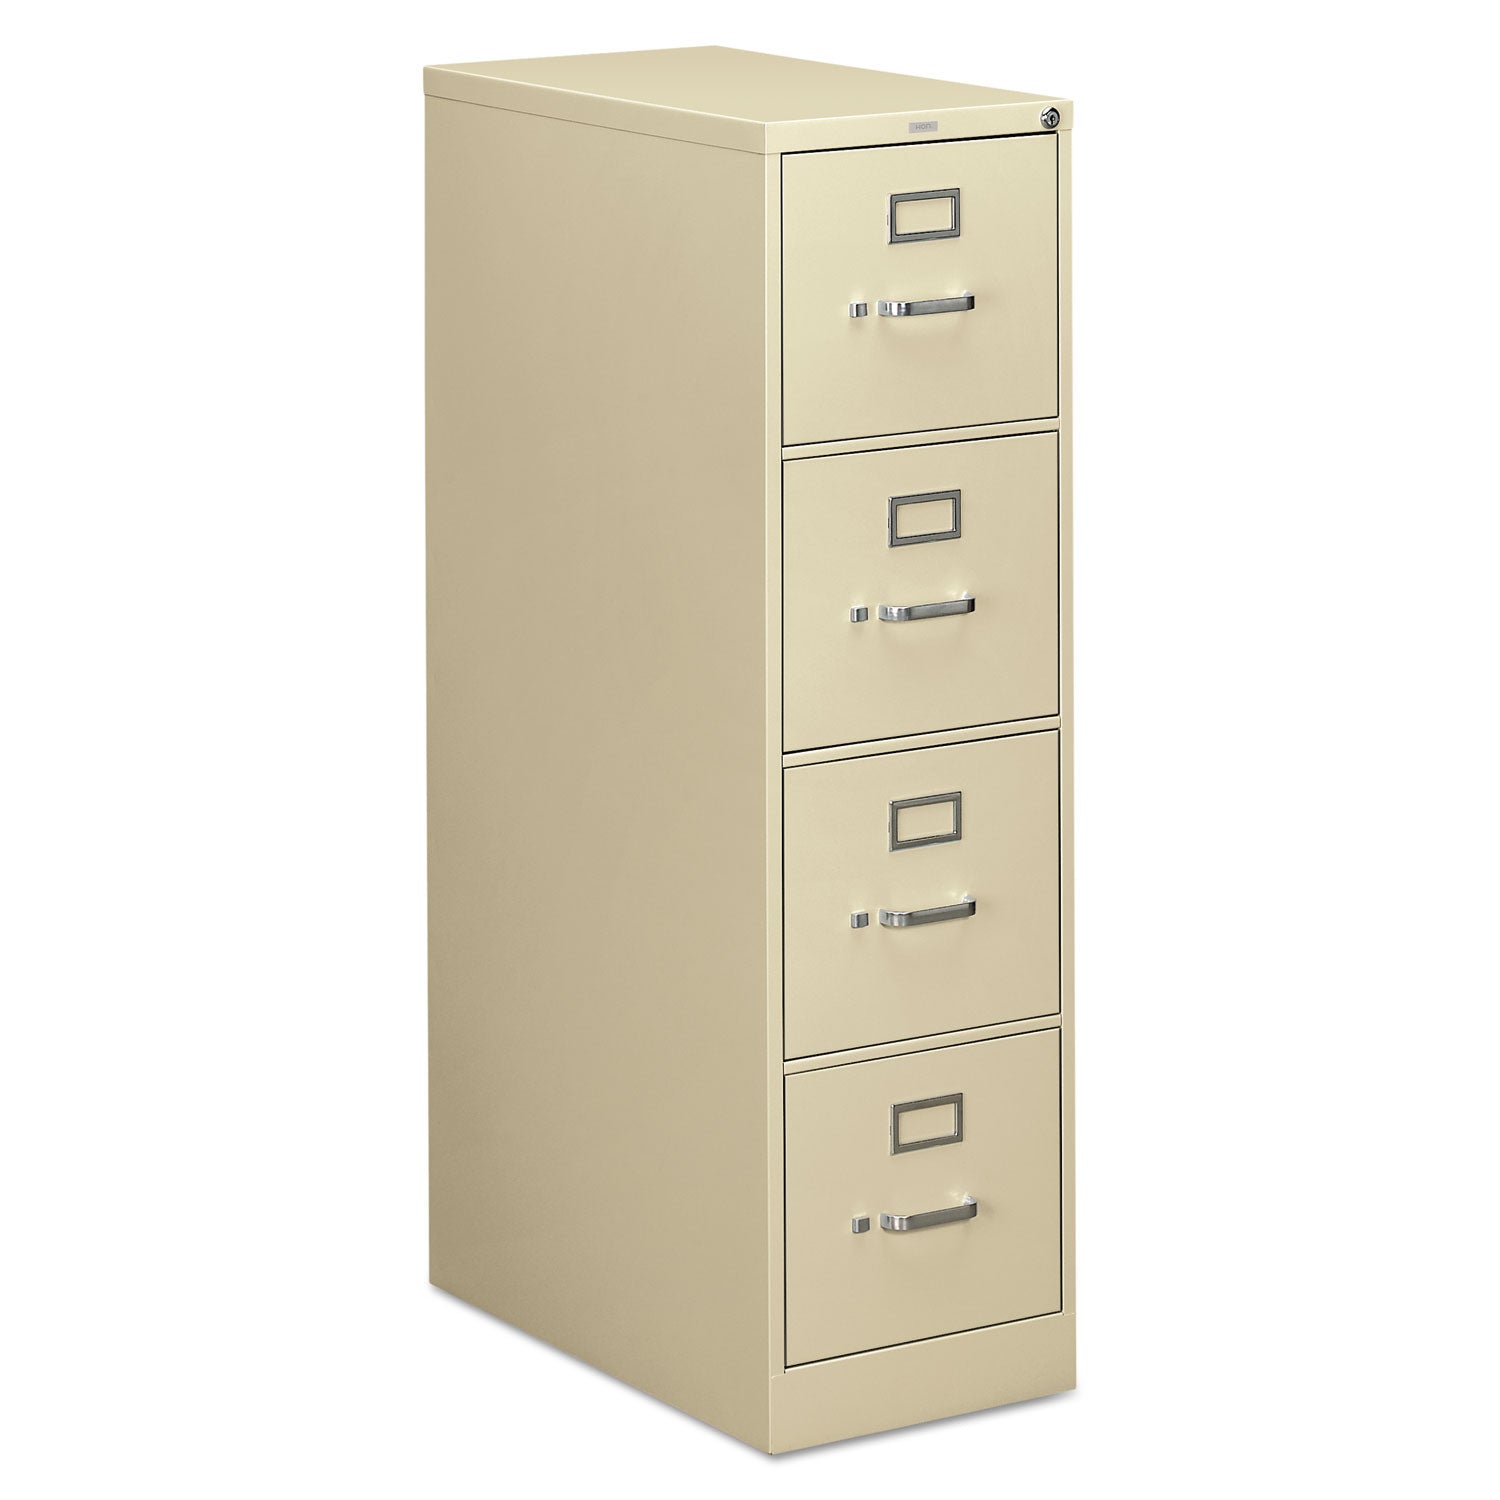 310 Series Vertical File, 4 Letter-Size File Drawers, Putty, 15" x 26.5" x 52 - 